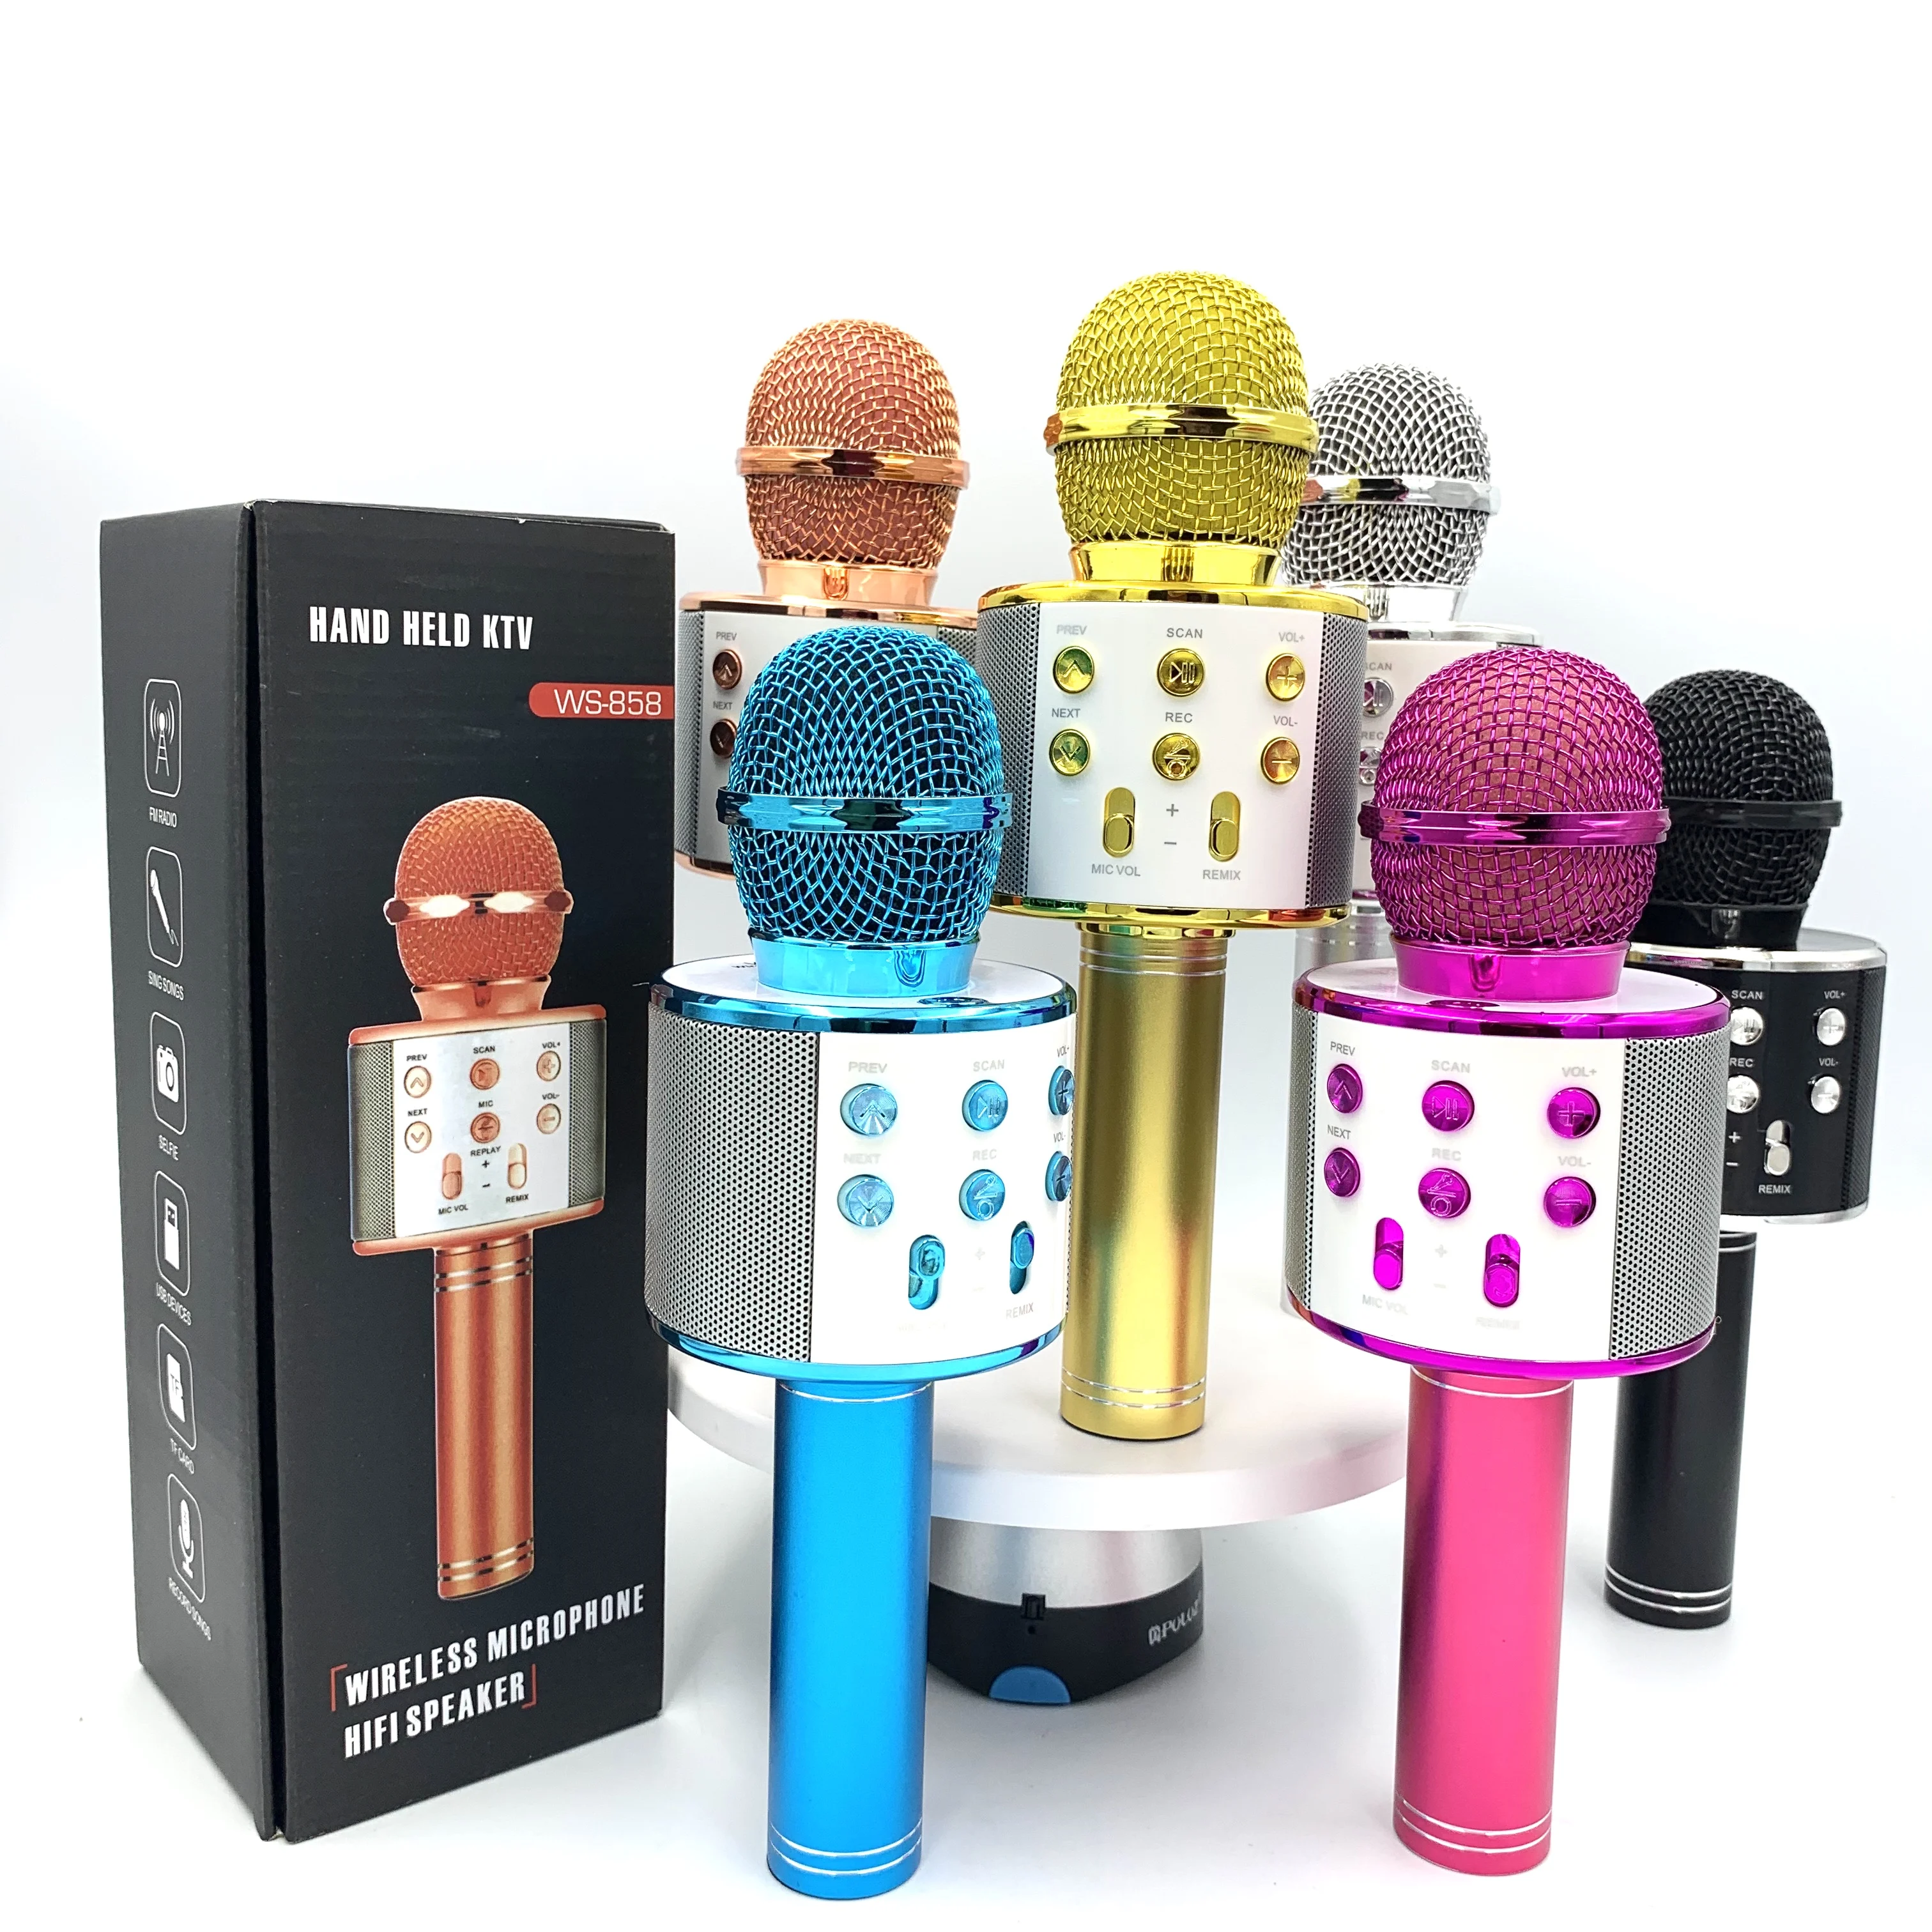 Wireless Karaoke Microphones for Kids Children Microphones for Singing Portable Karaoke Machine Mic for Home Birthday Party Wedding Live-Streaming Vlog Pink Wireless Microphones Bluetooth Speaker 